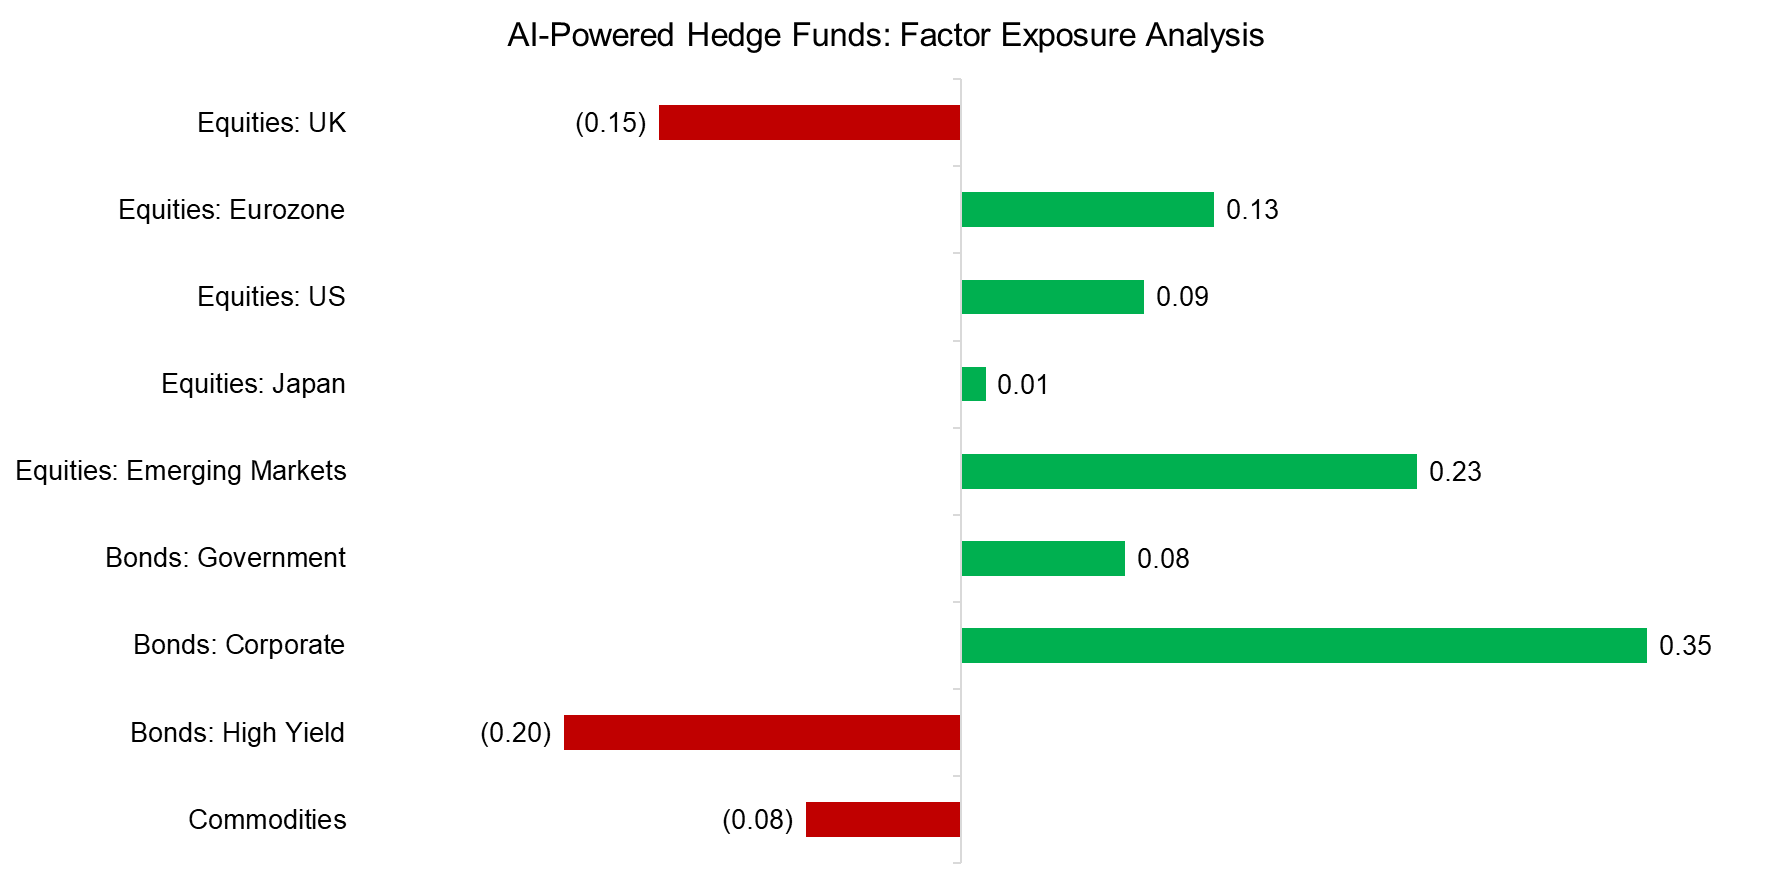 AI-Powered Hedge Funds Factor Exposure Analysis